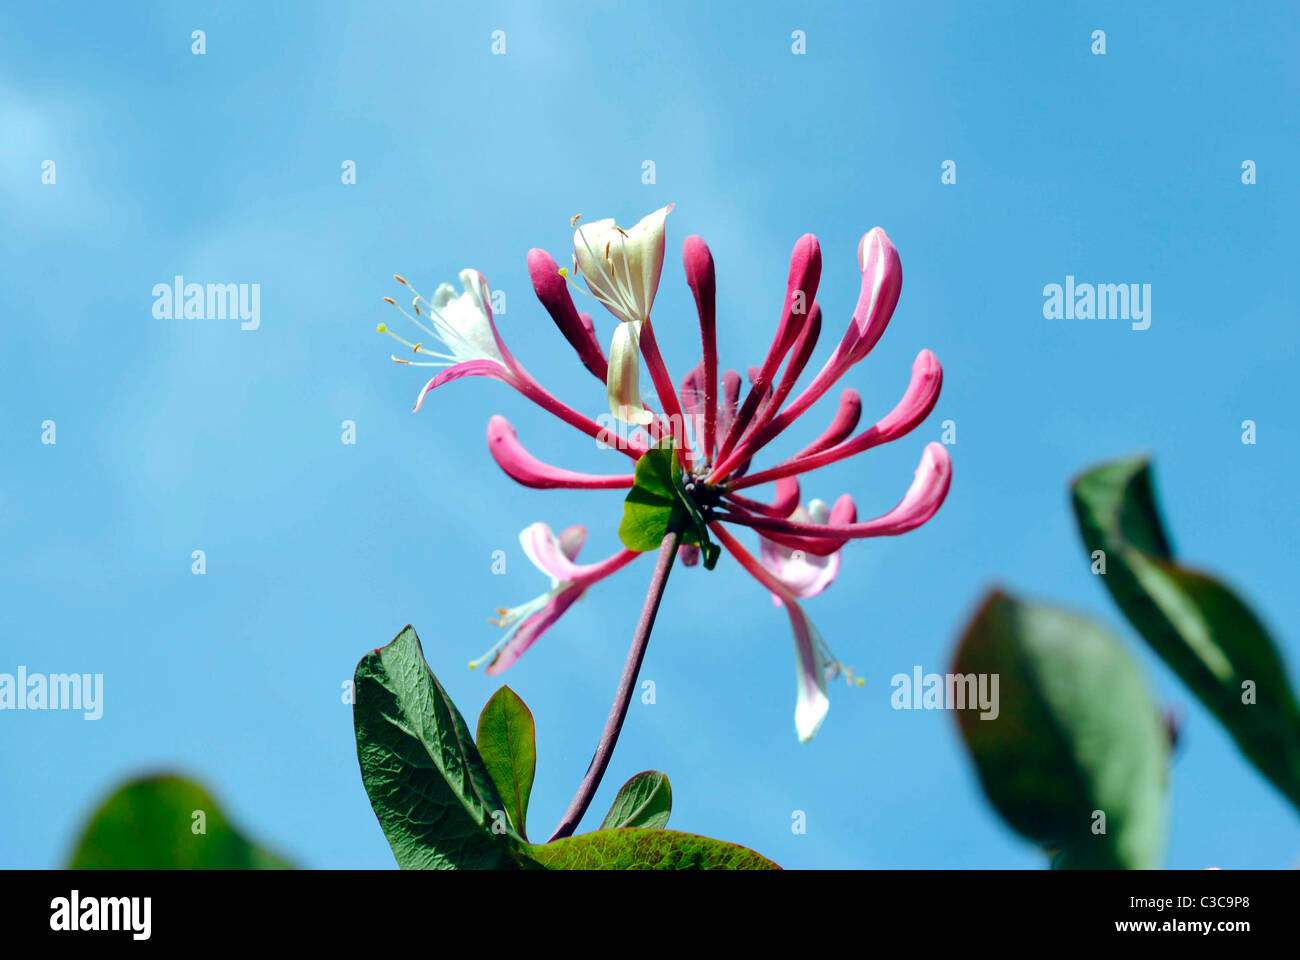 A close up view of a Honeysuckle flower Stock Photo